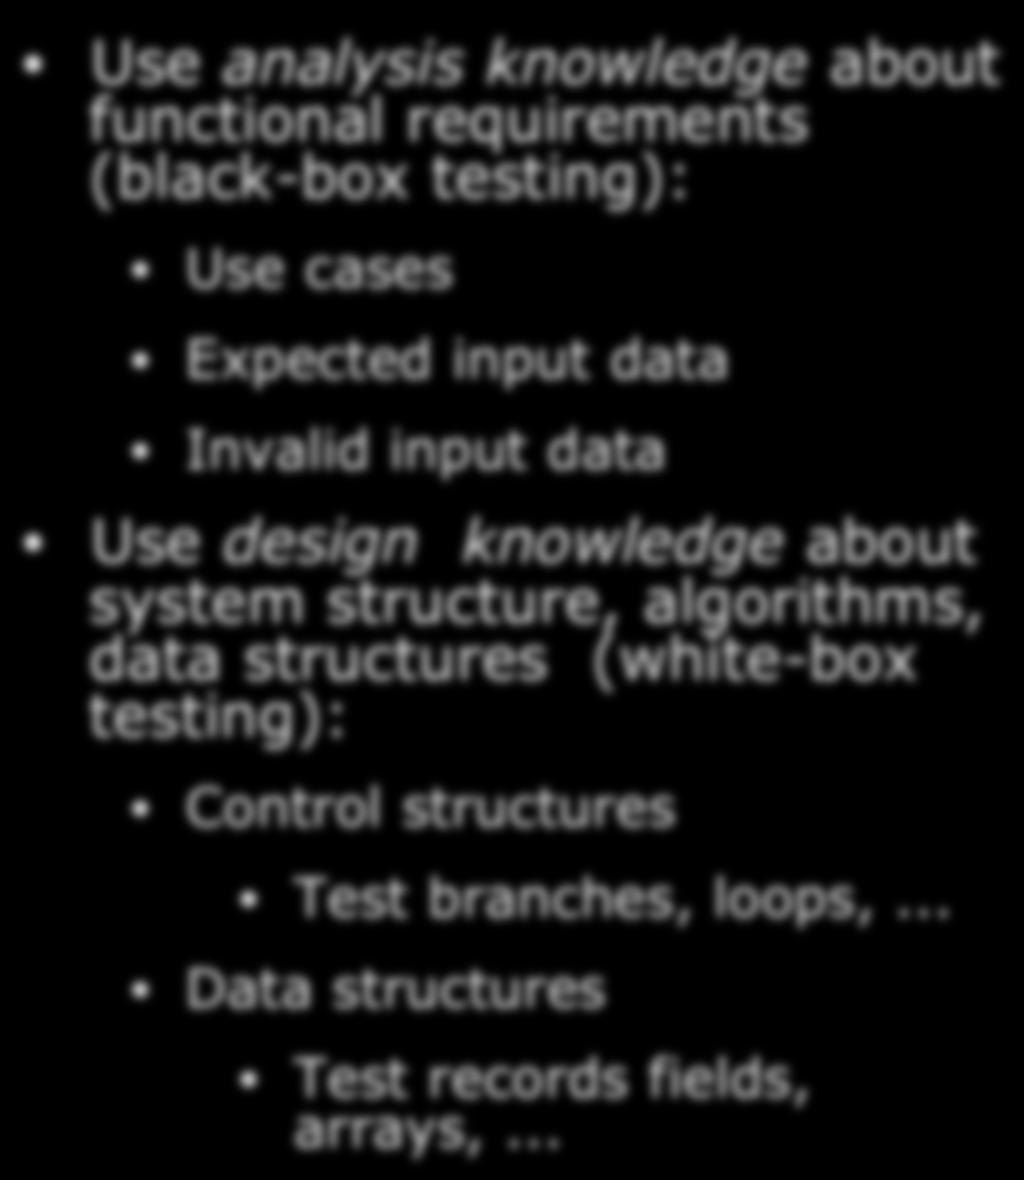 Guidance for Test Case Selection Use analysis knowledge about functional requirements (black-box testing): Use cases Expected input data Invalid